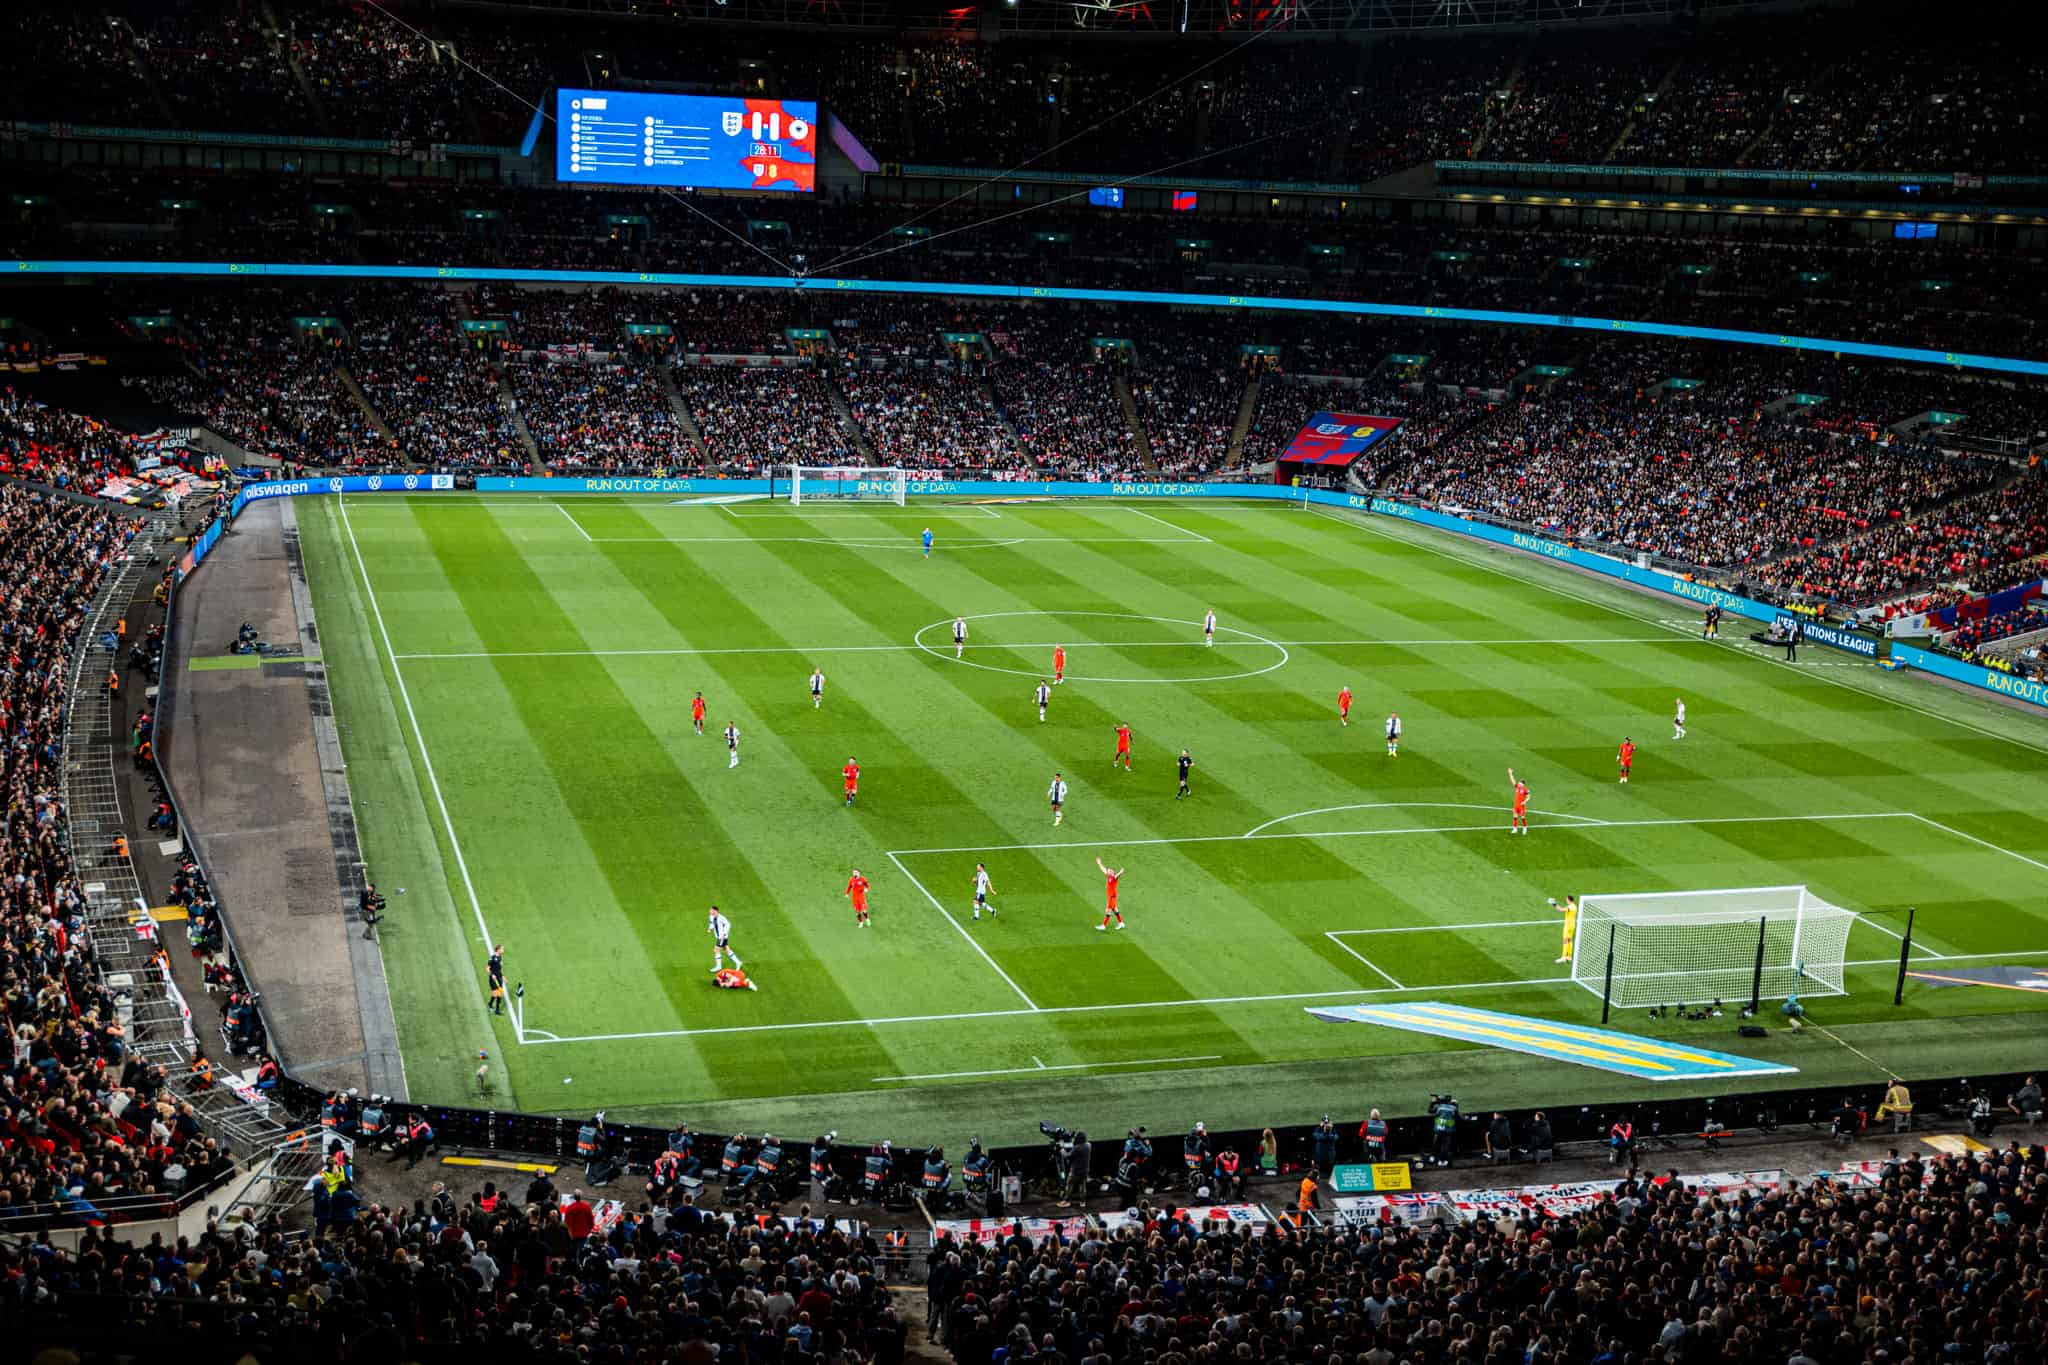 England face Germany in an international football match in front of home fans at Wembley Stadium